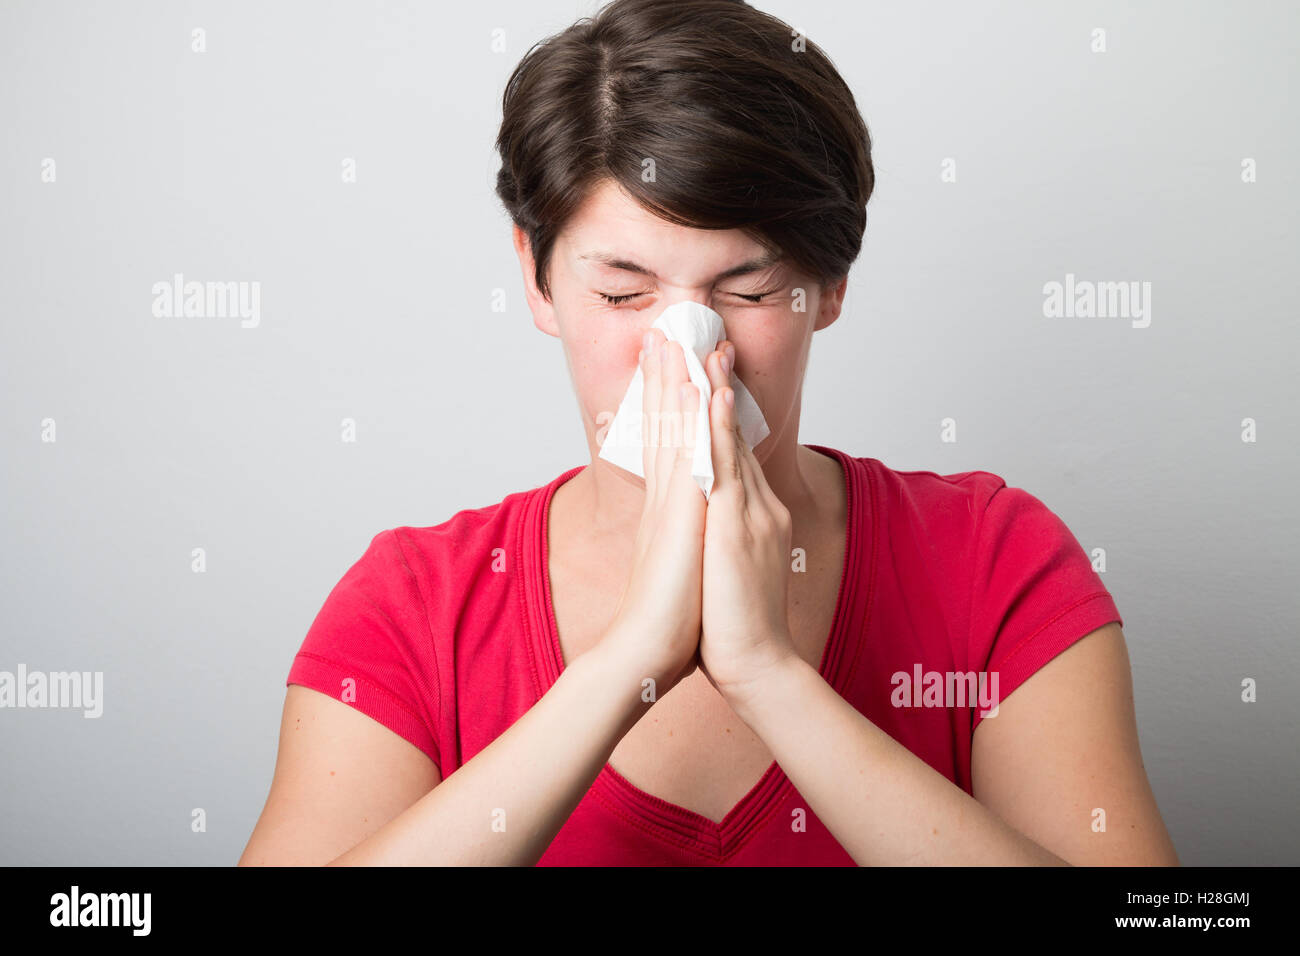 Young woman blowing her nose too hard Stock Photo